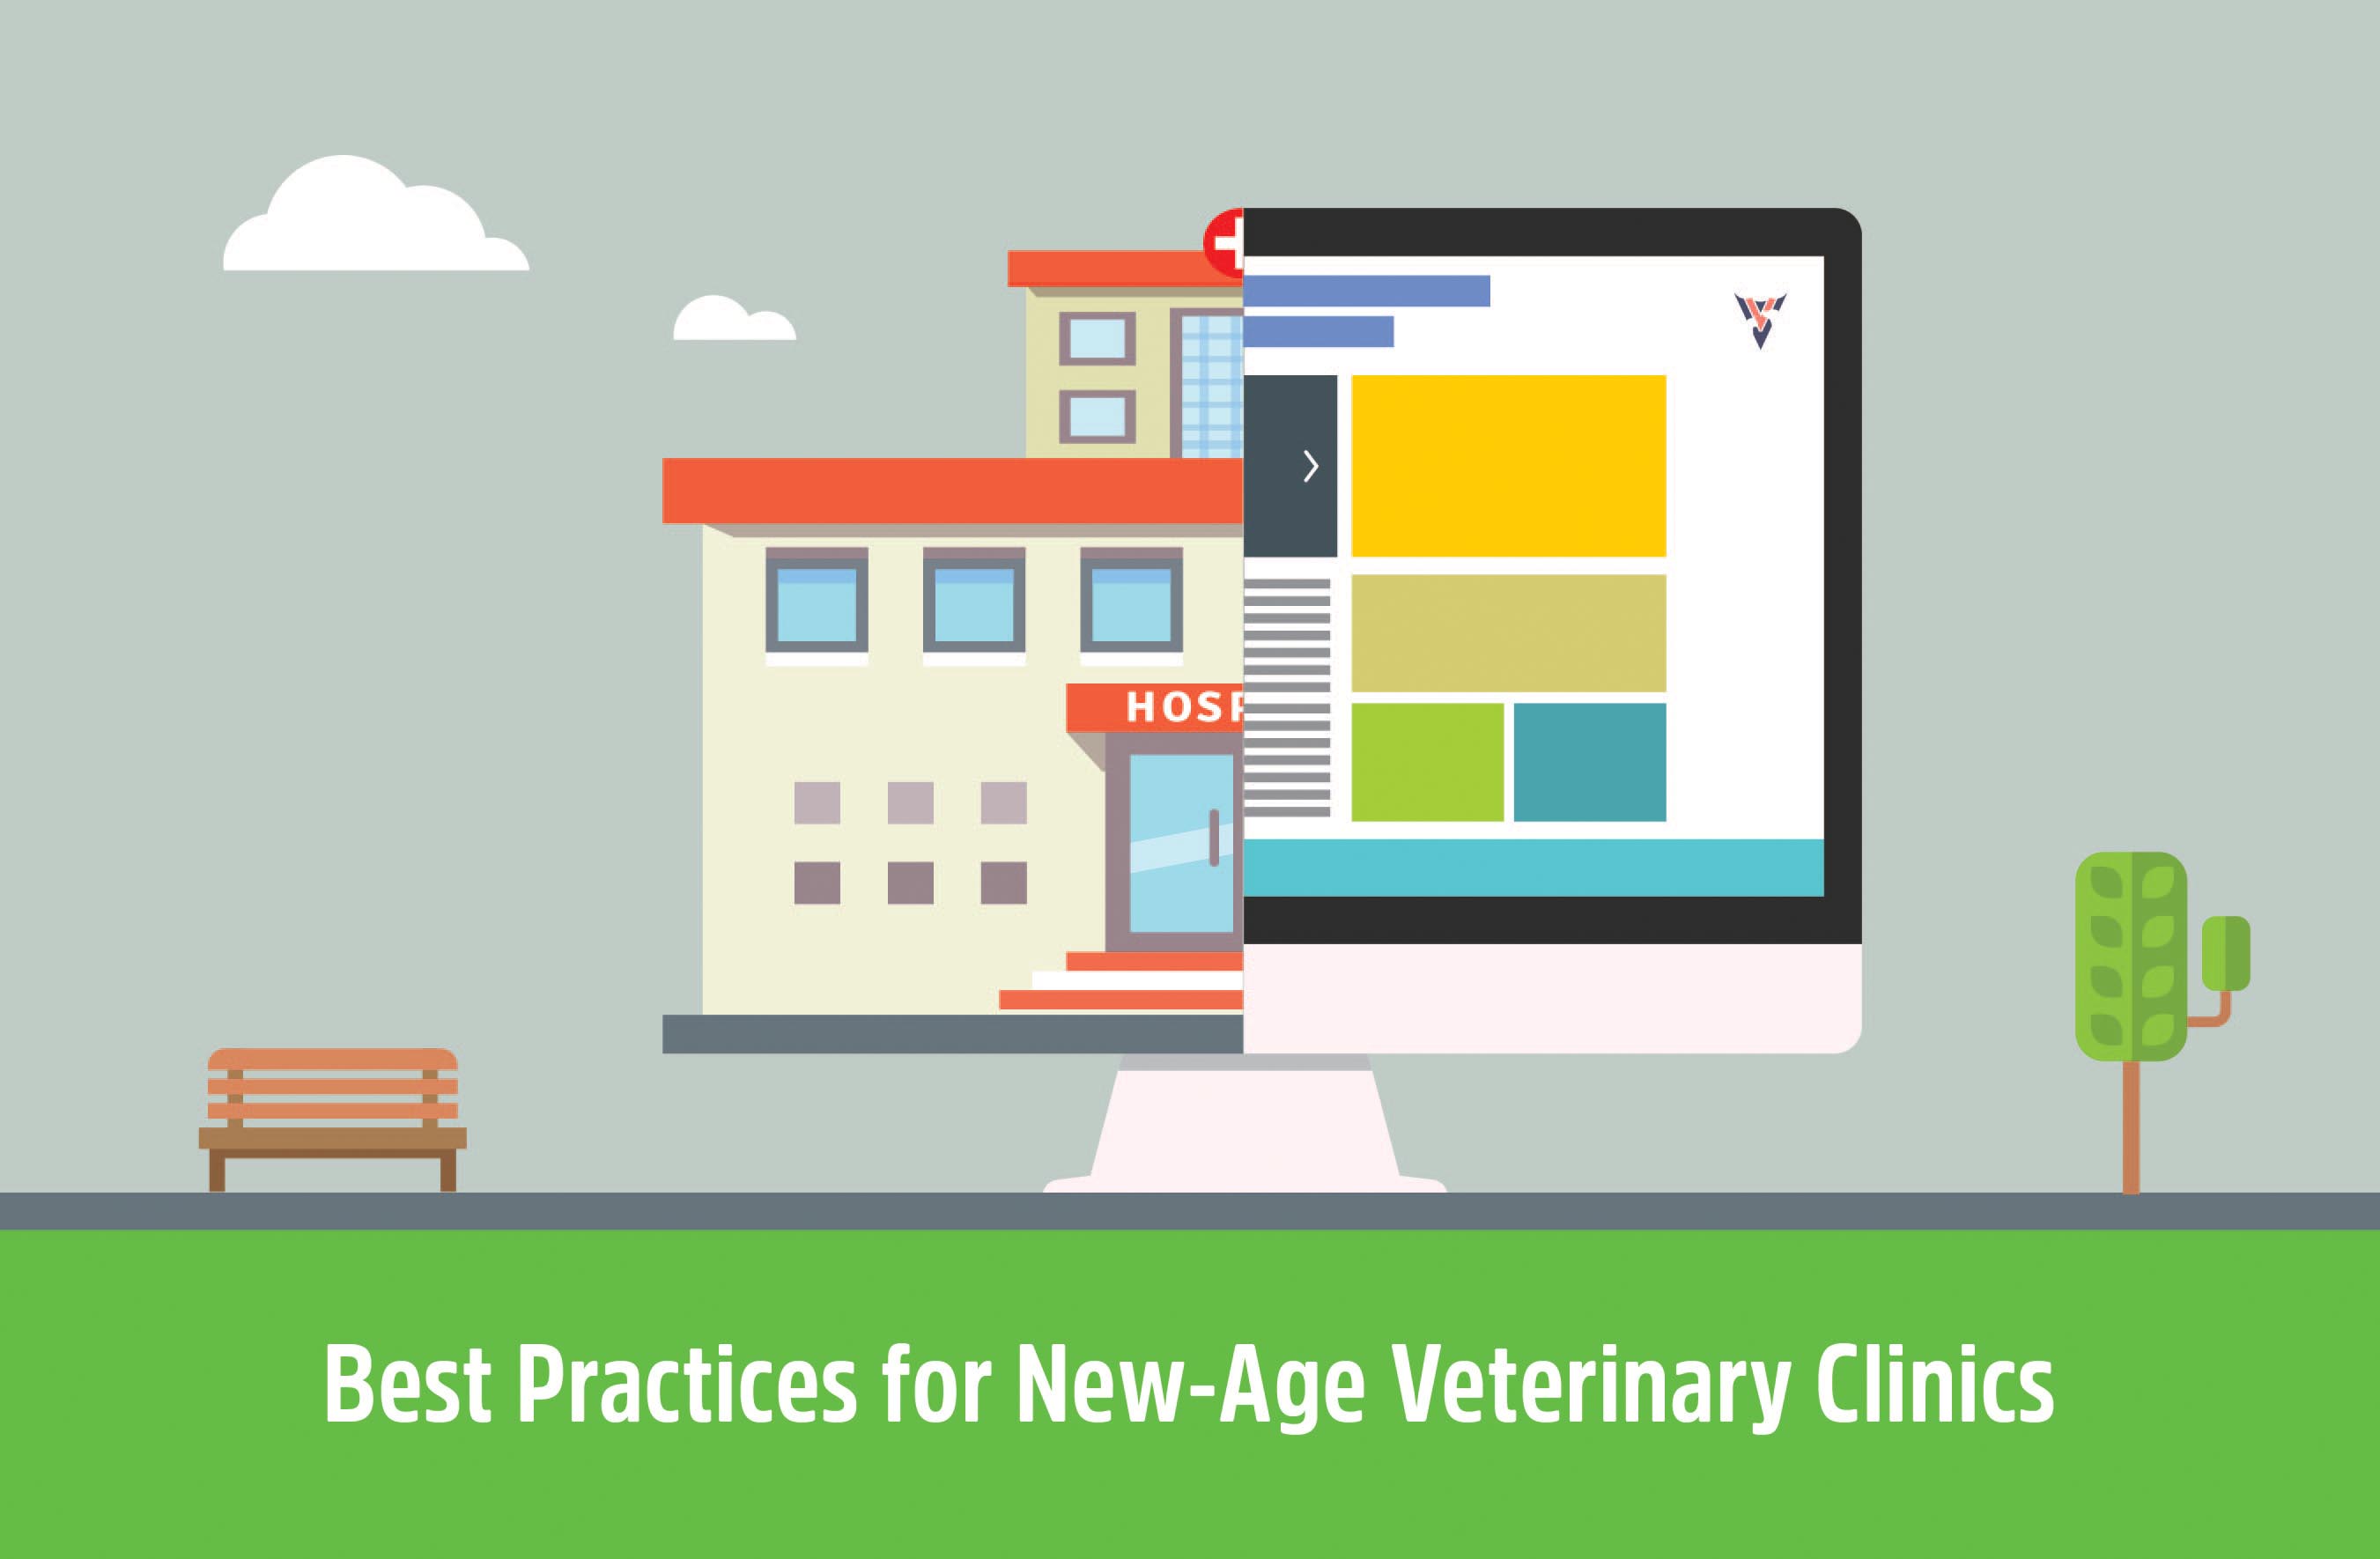 Best Practices For New-Age Veterinary Clinics, Hospitals, And Animal Care Centers